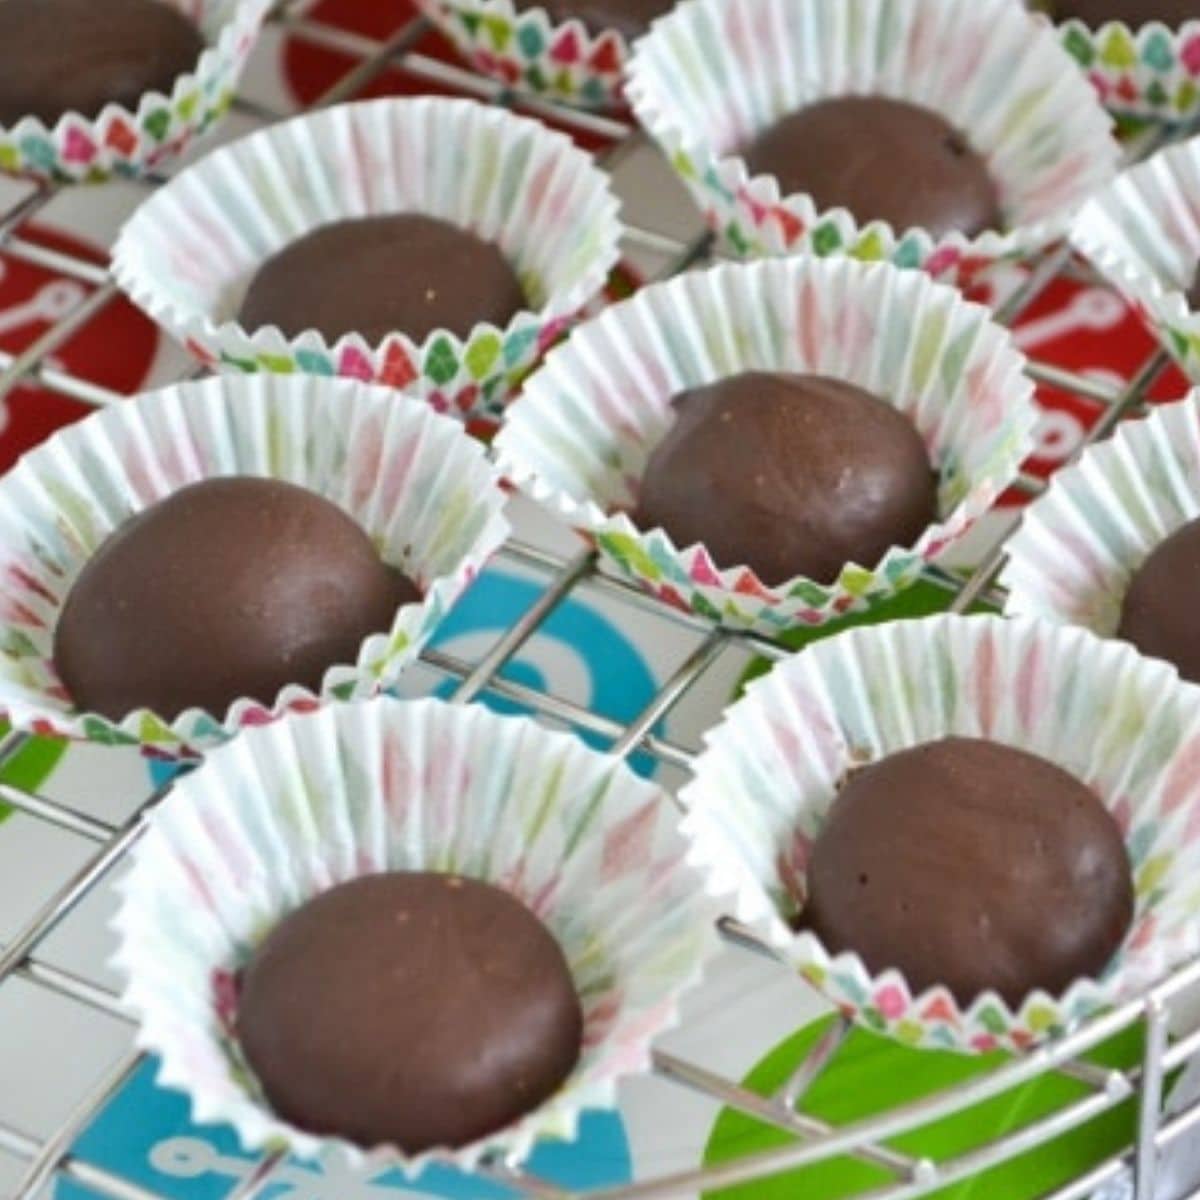 Homemade chocolate covered raspberry jellies in white paper cups.